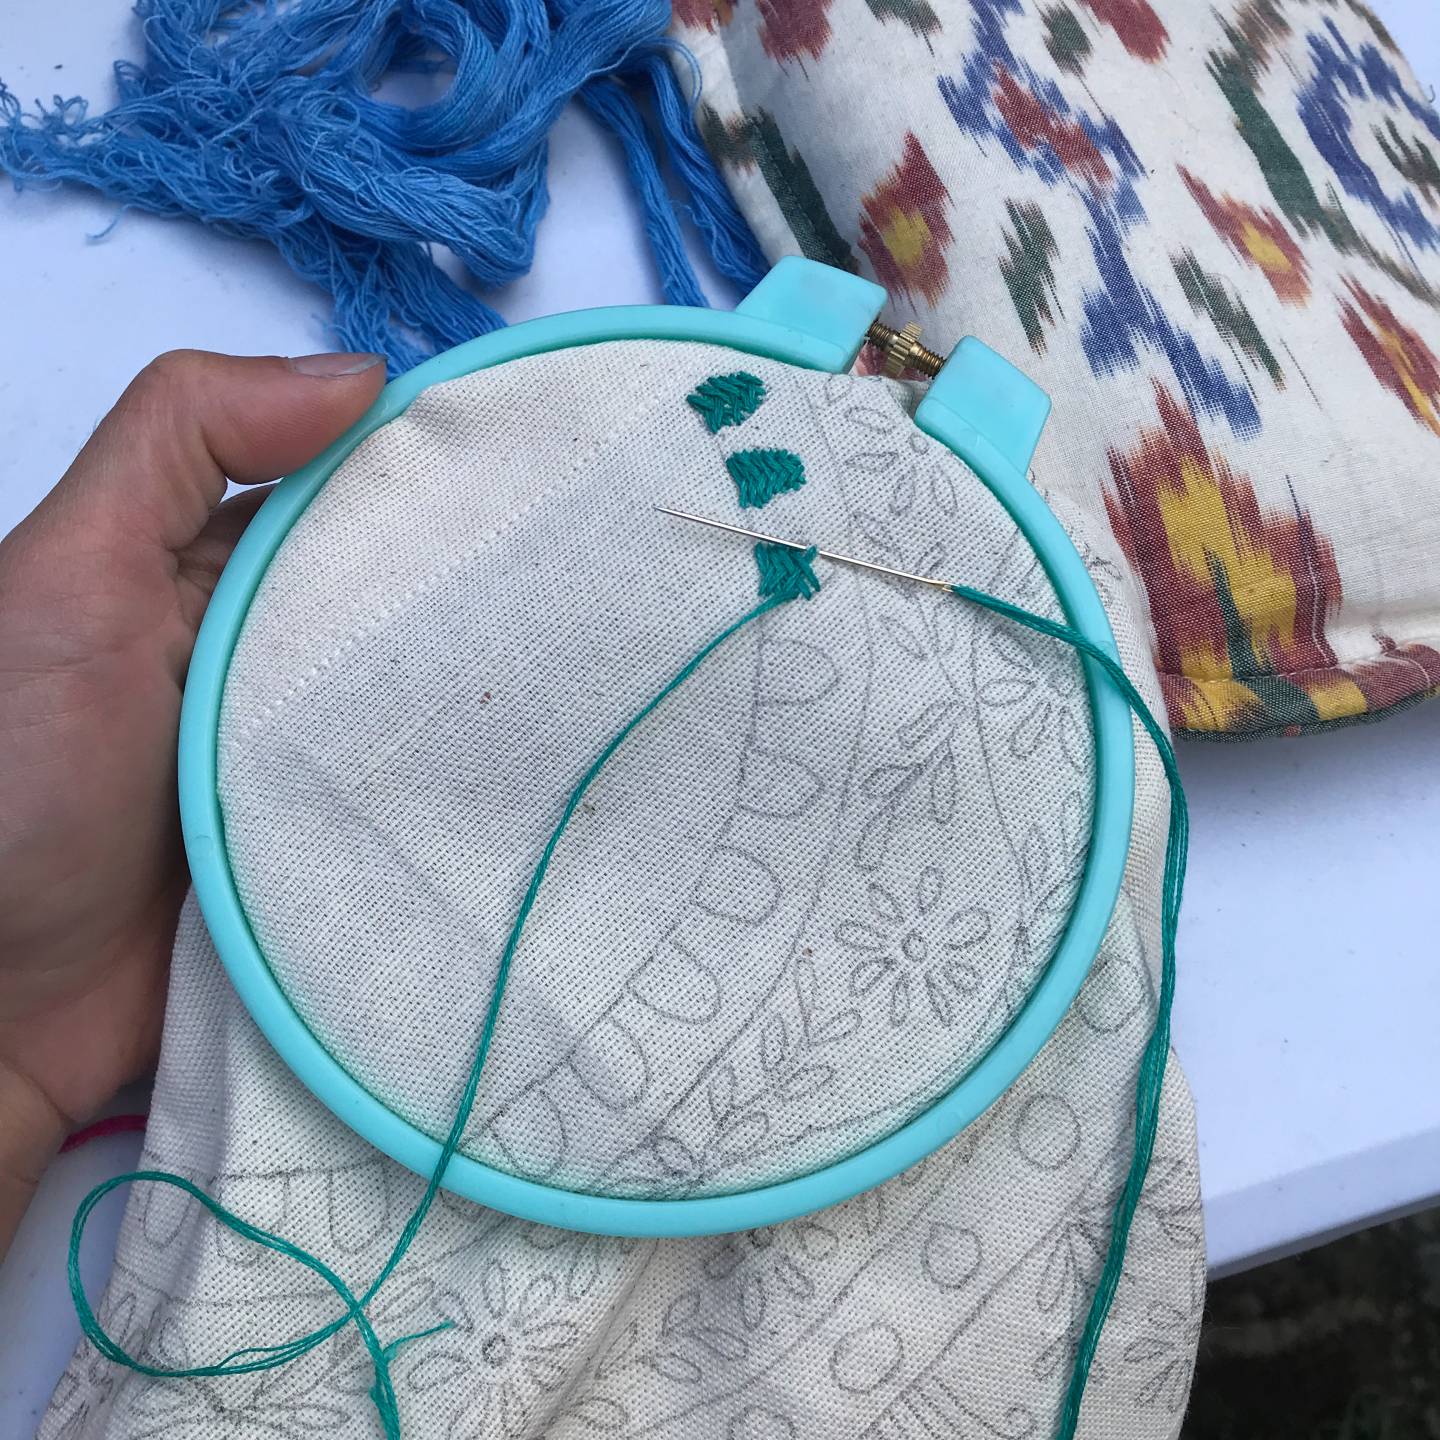 Small group BARRILETE embroidery with Claribel! (In-person) / TBD